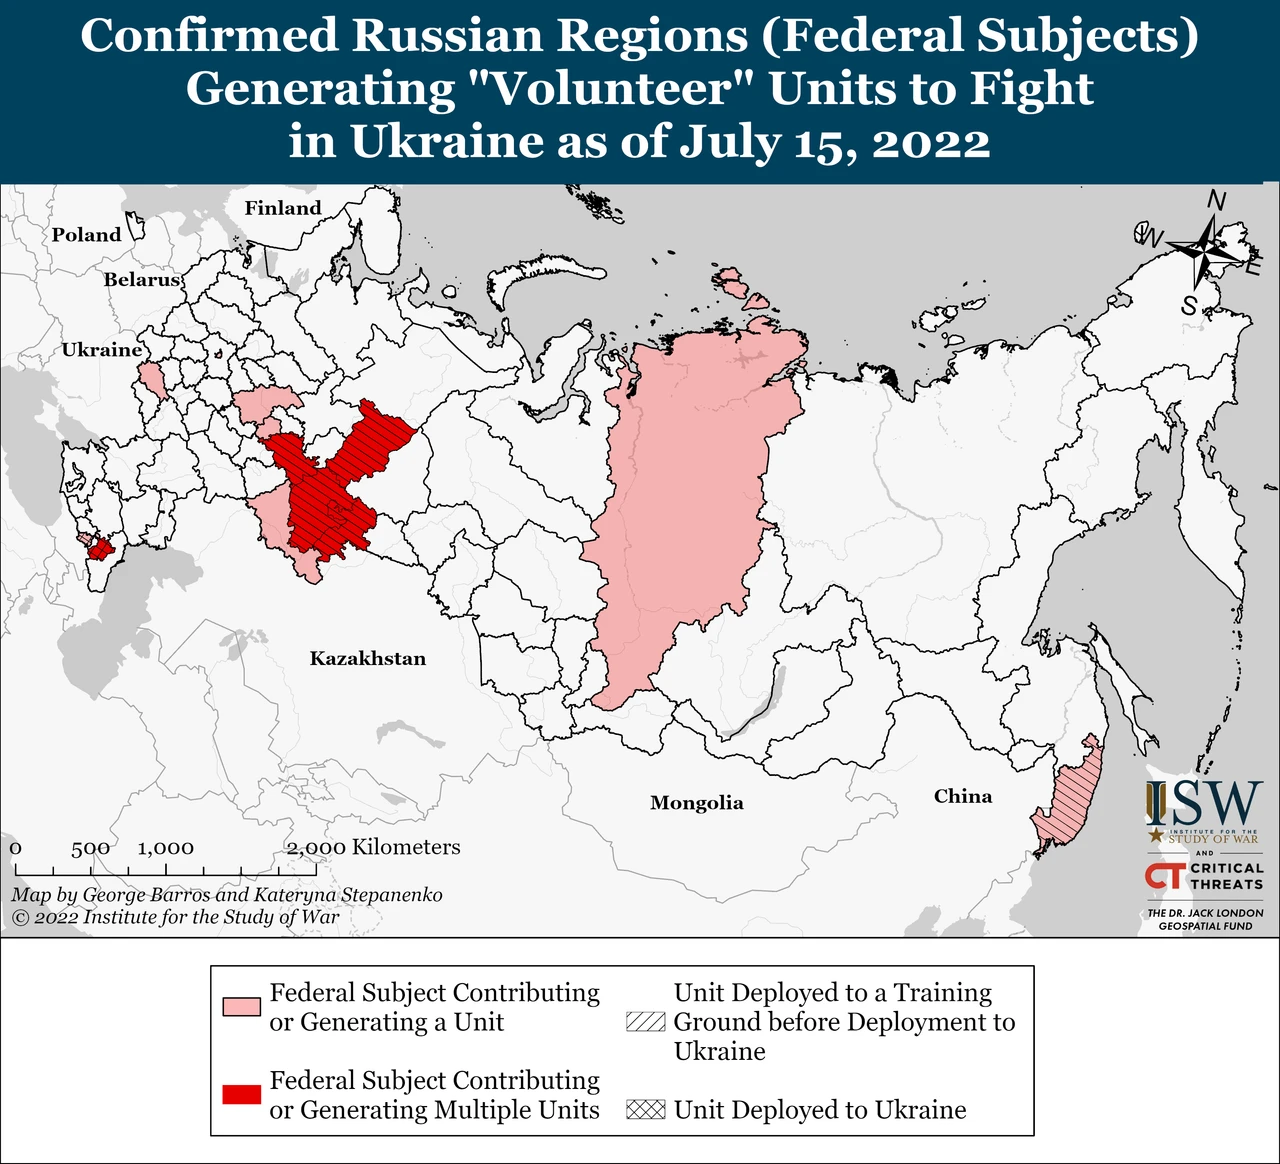 ISW Russian Offensive Campaign Assessment, July 18